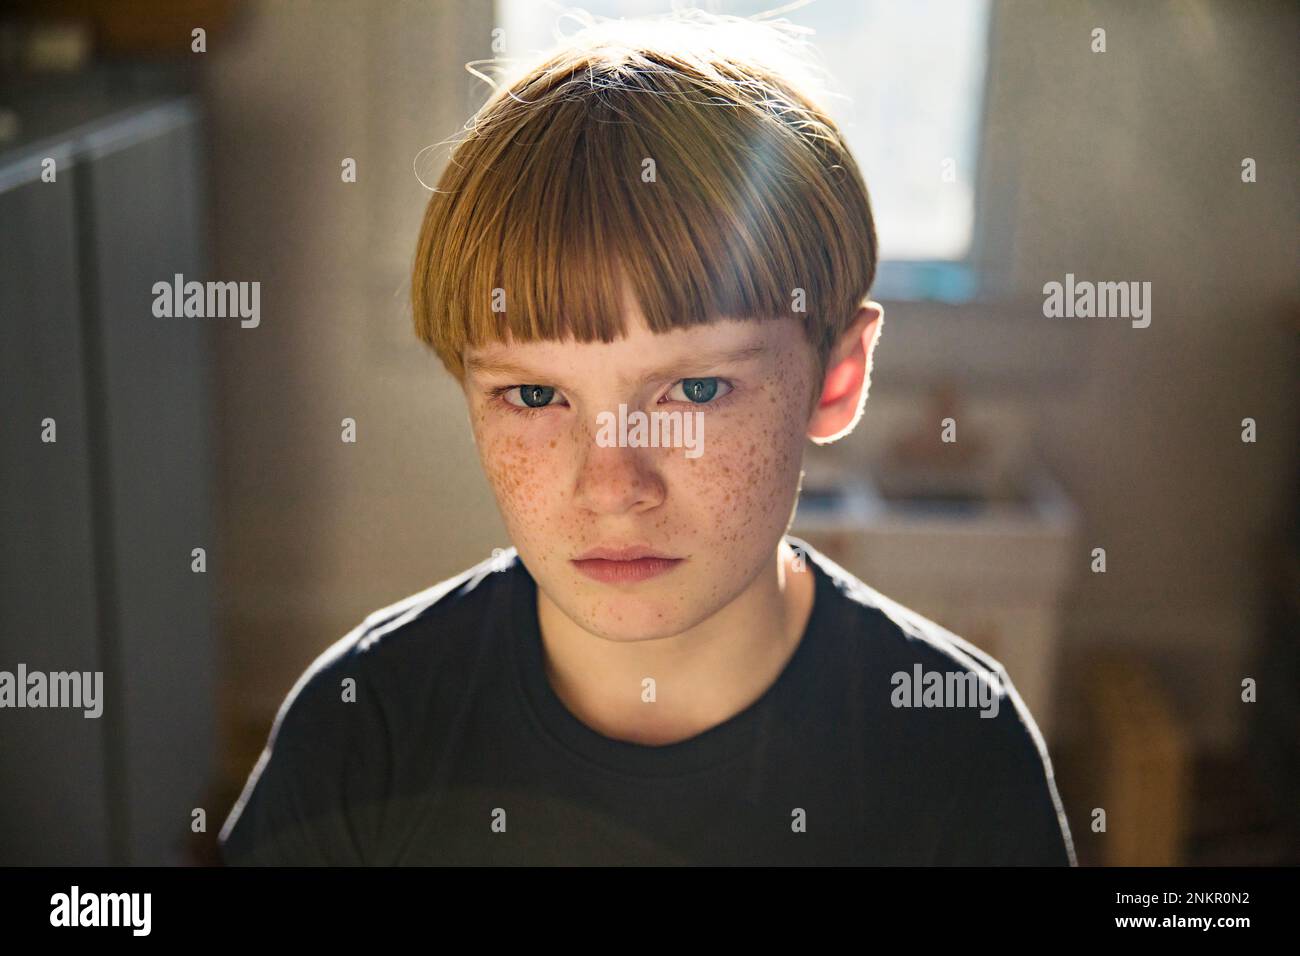 Portrait of boy with red hair and freckles looking towards camera Stock Photo